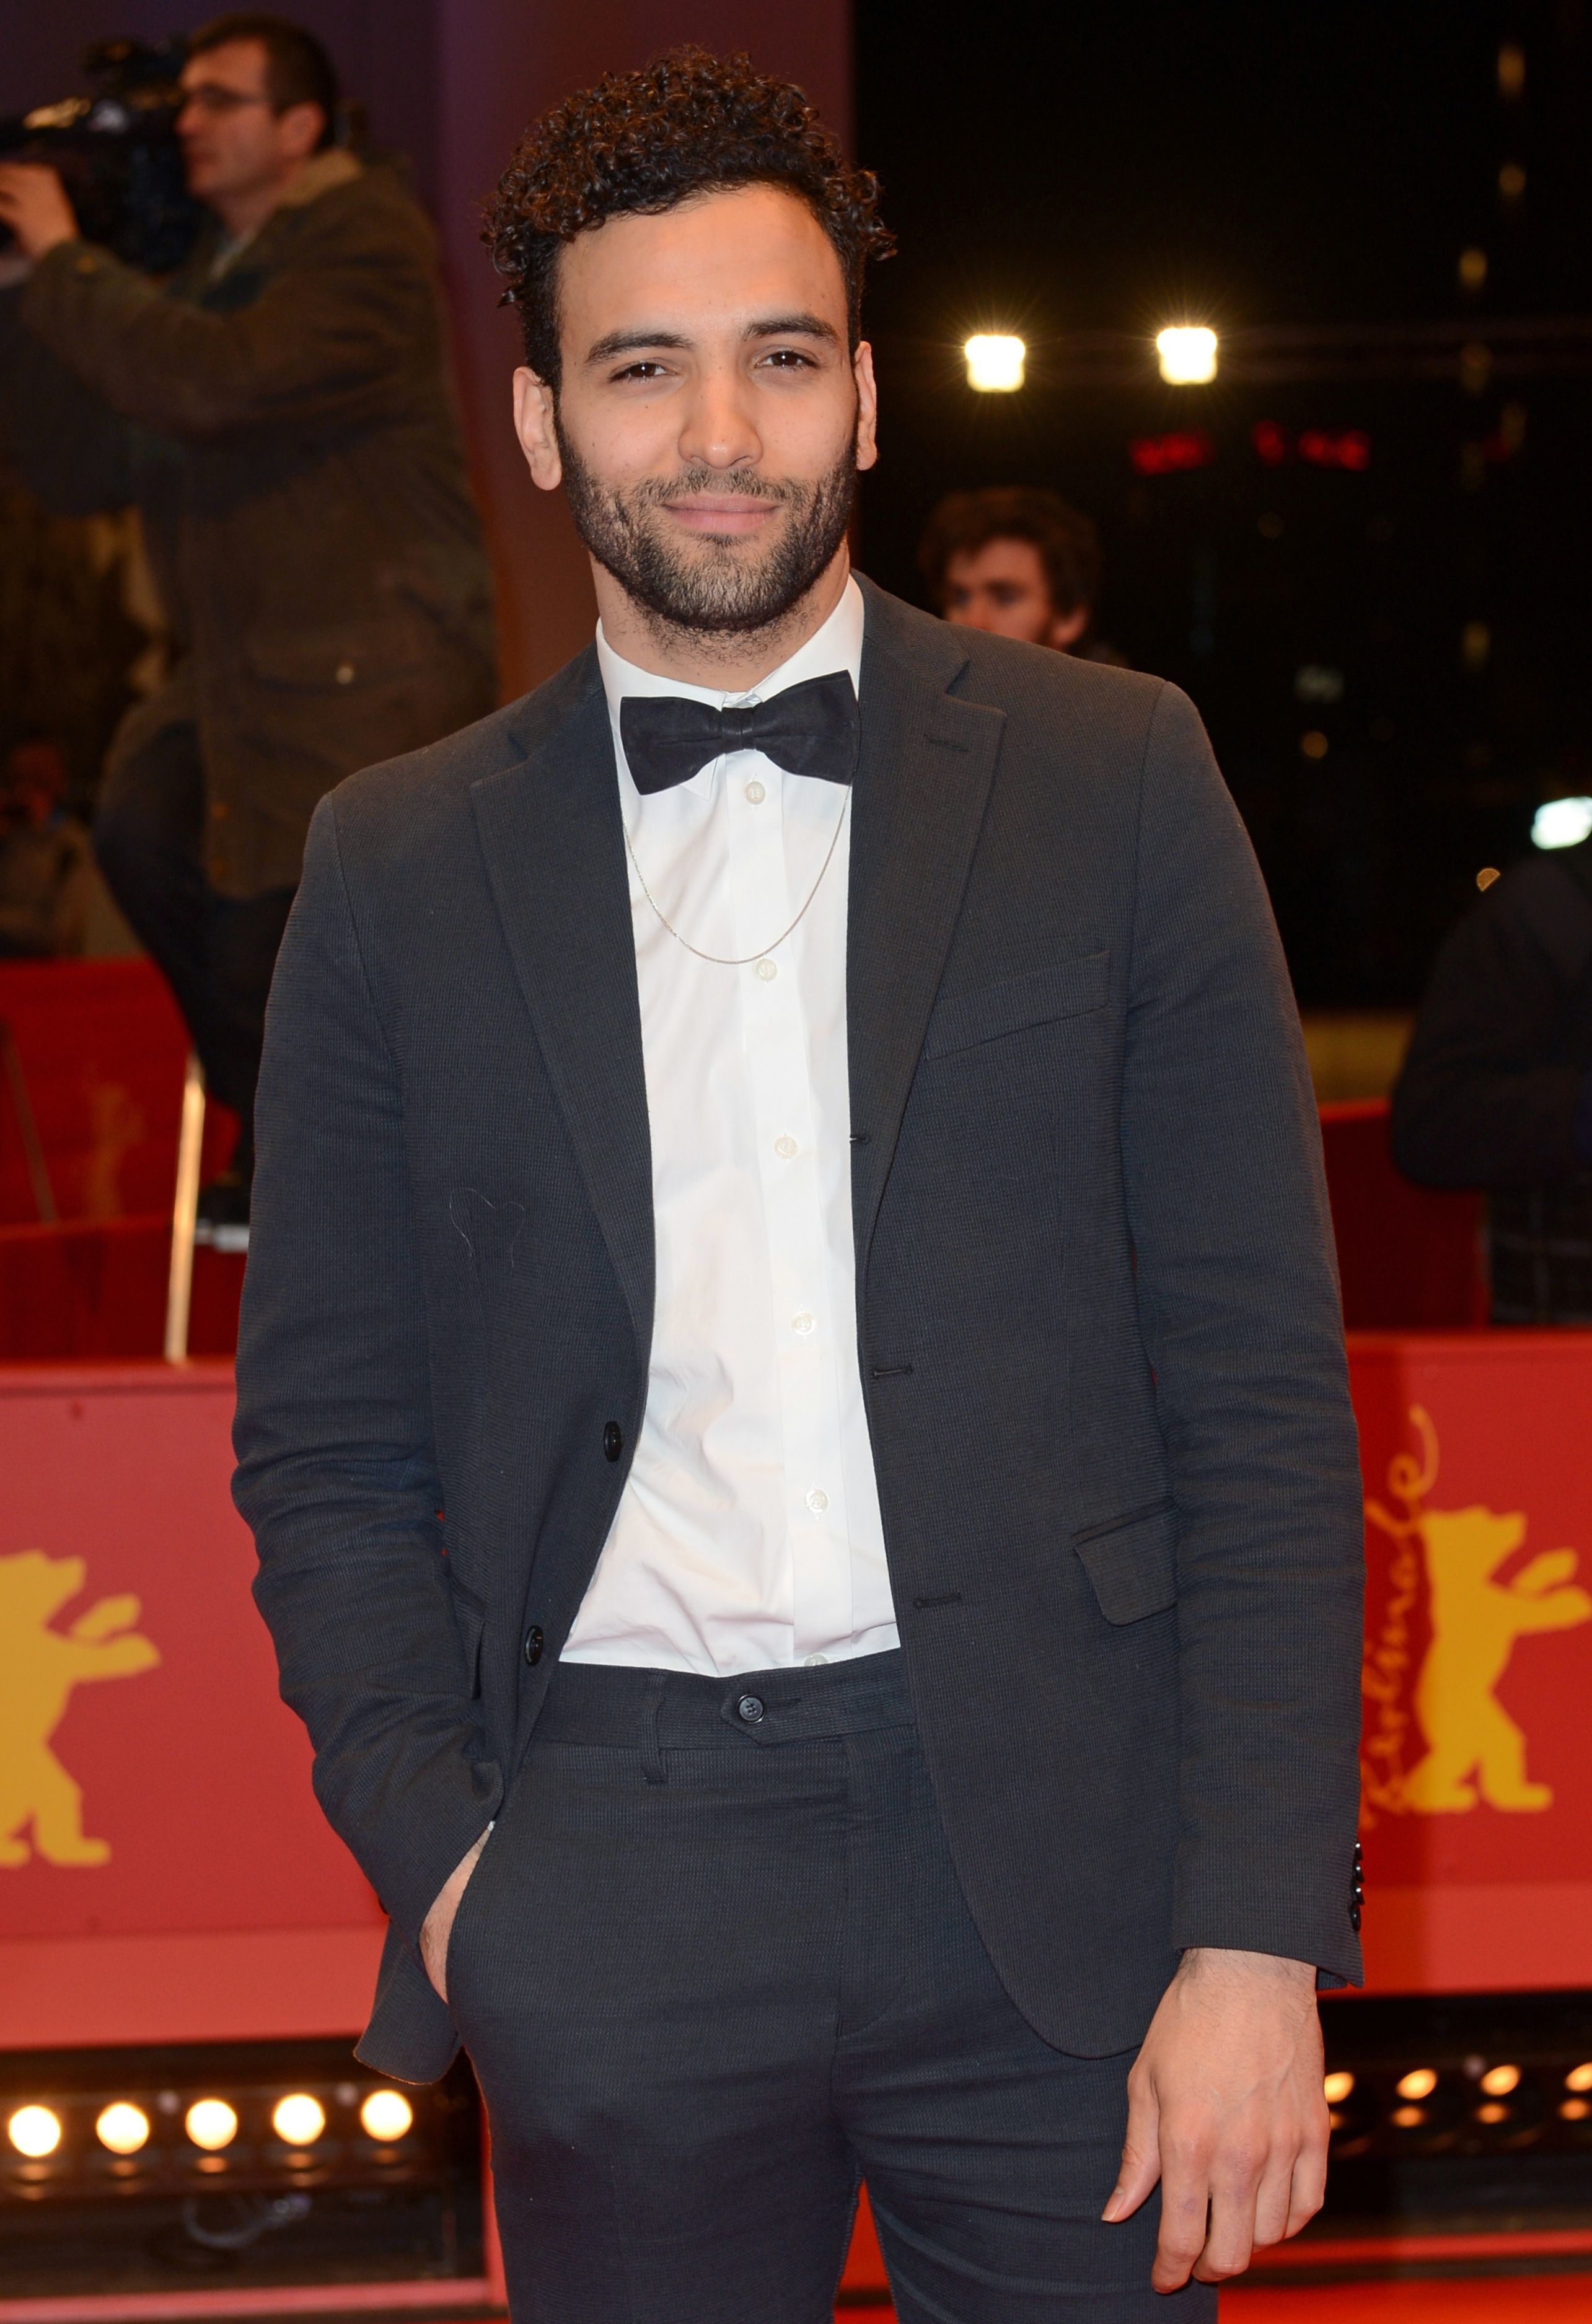 Marwan Kenzari - The hottest actors you don't know yet but should ...